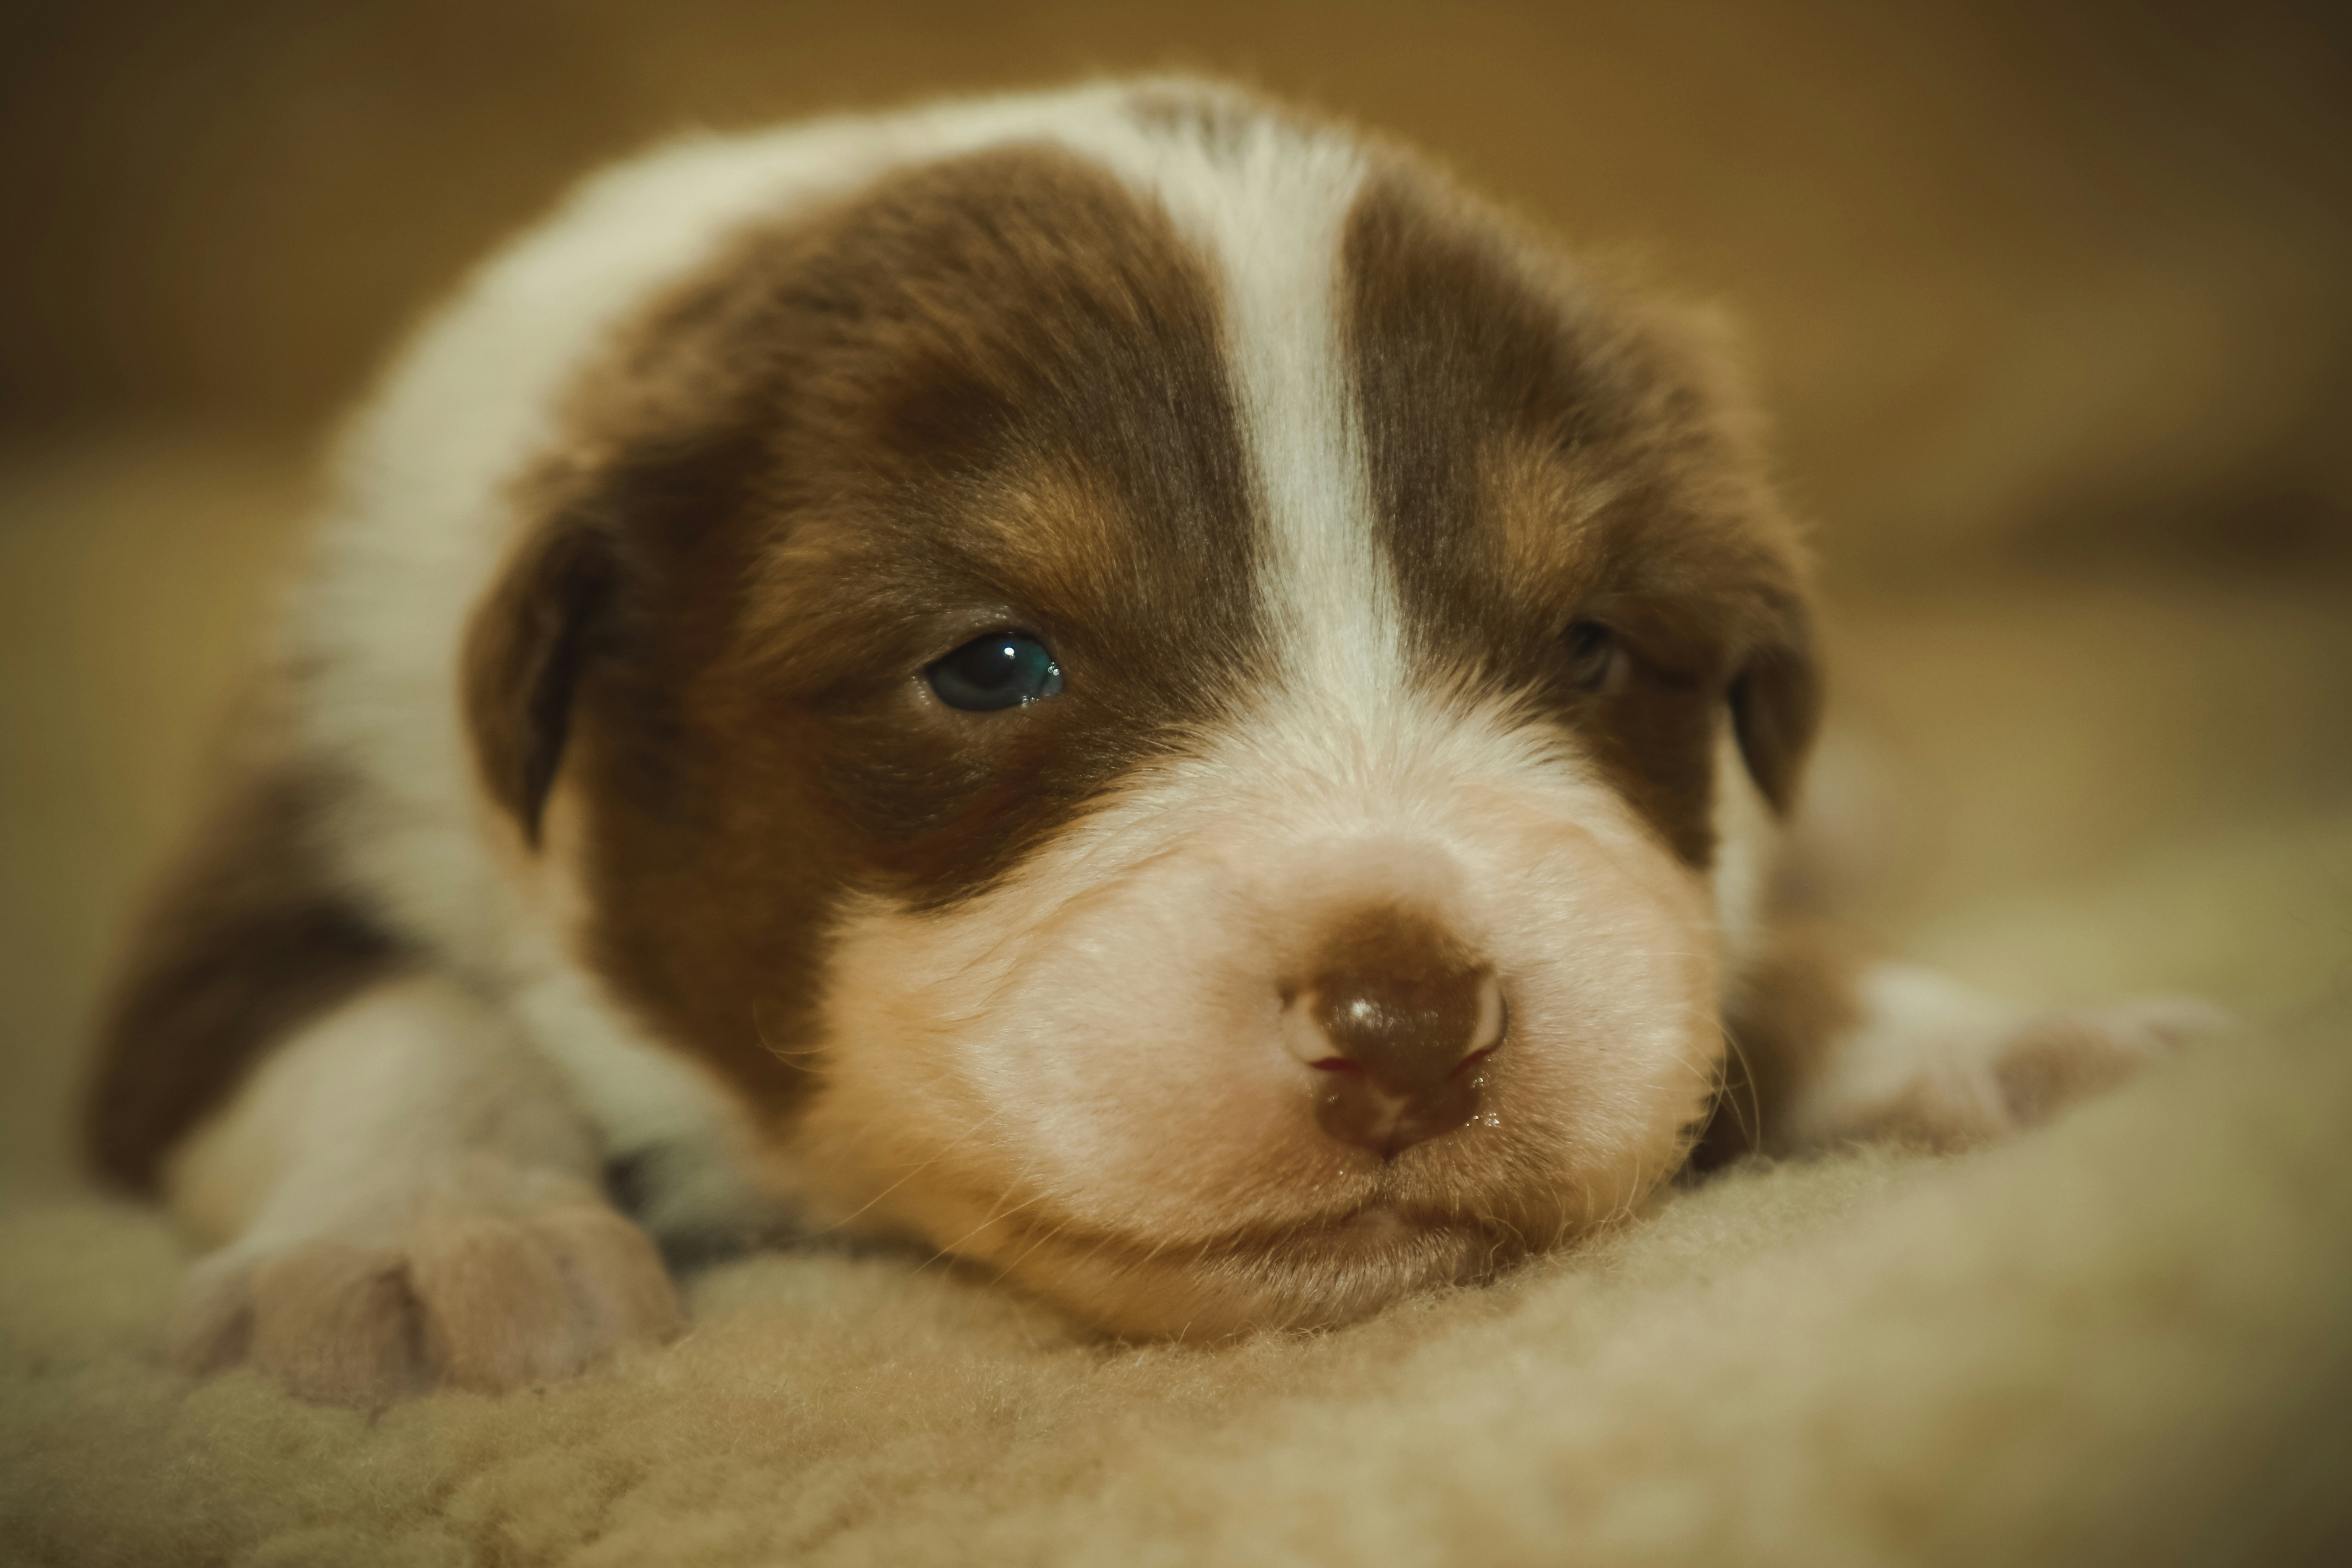 tilt shift lens photography of short-coated white and brown puppy